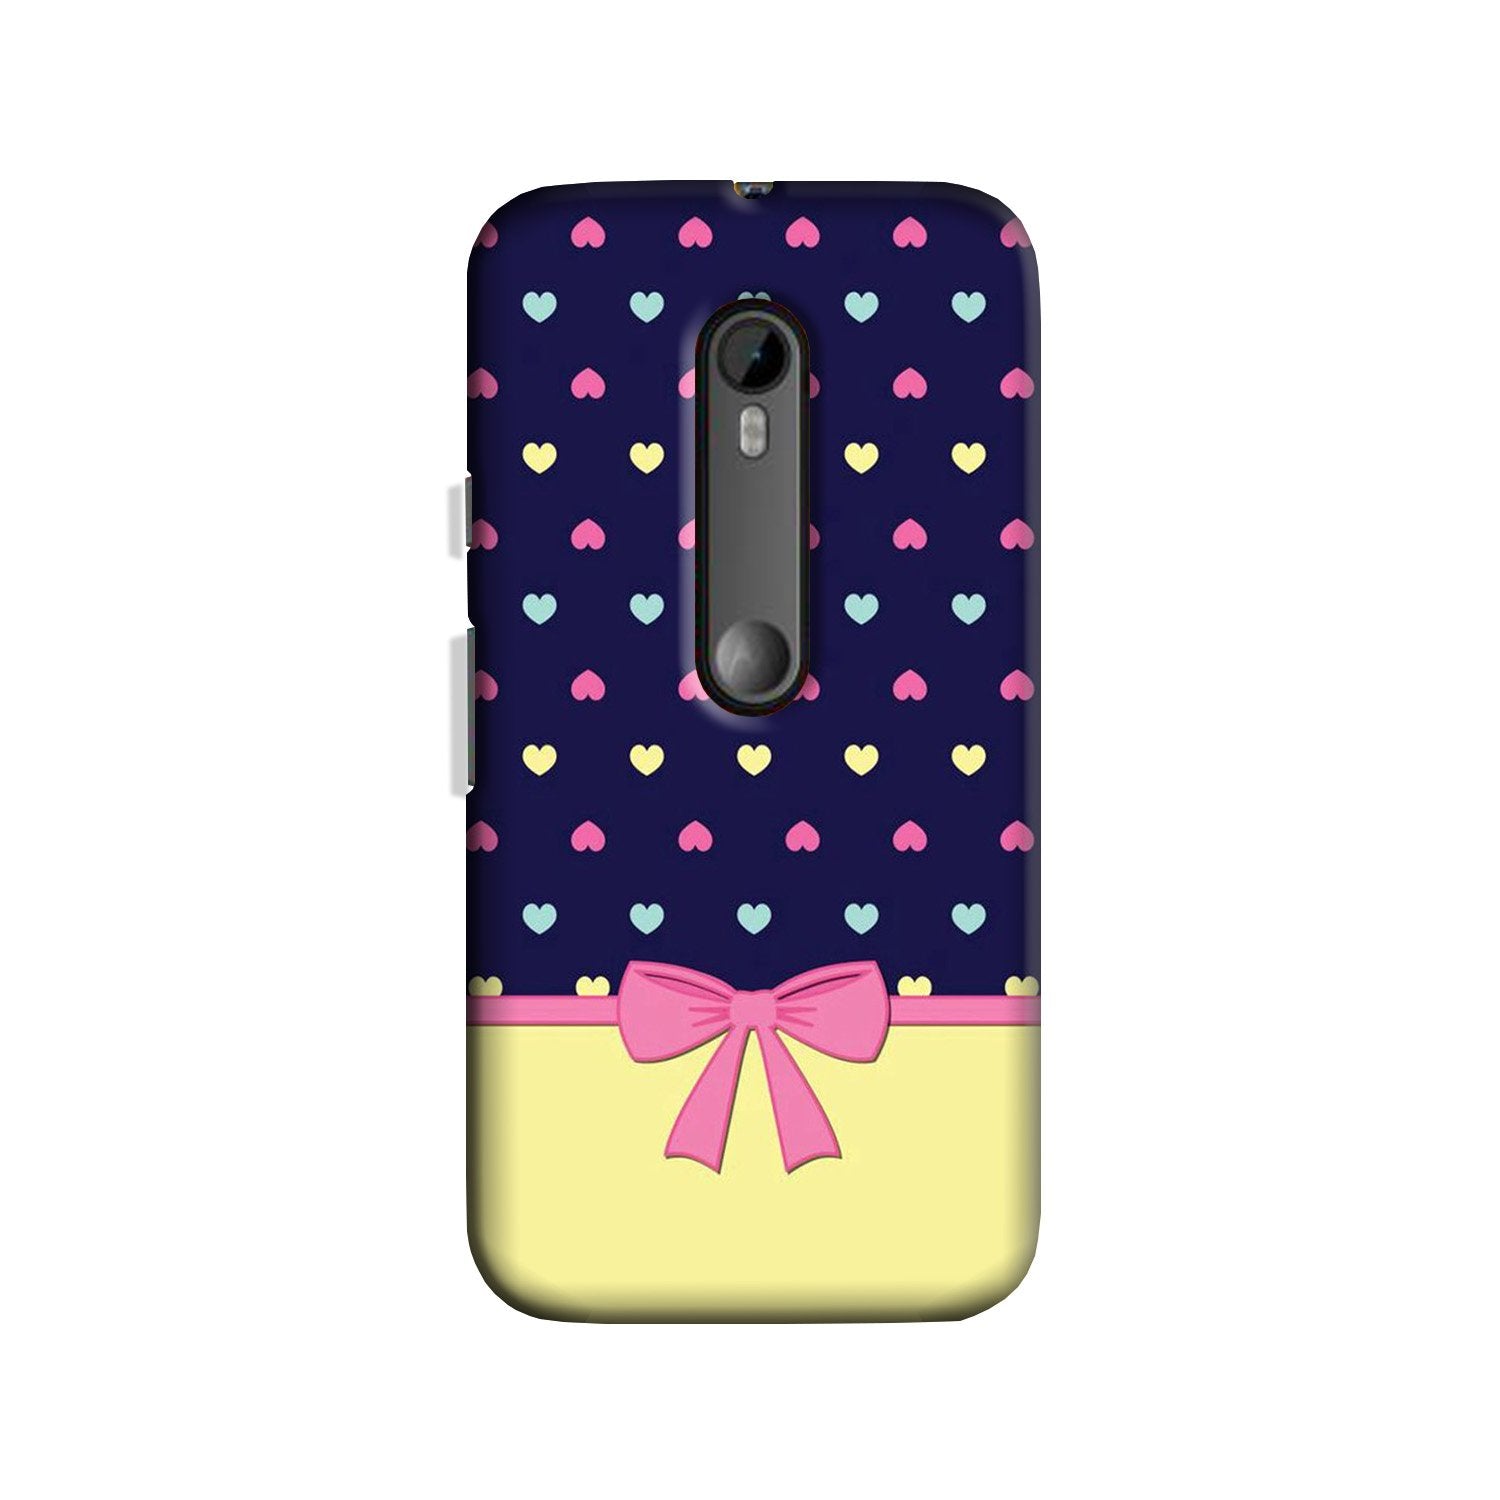 Gift Wrap5 Case for Moto X Play